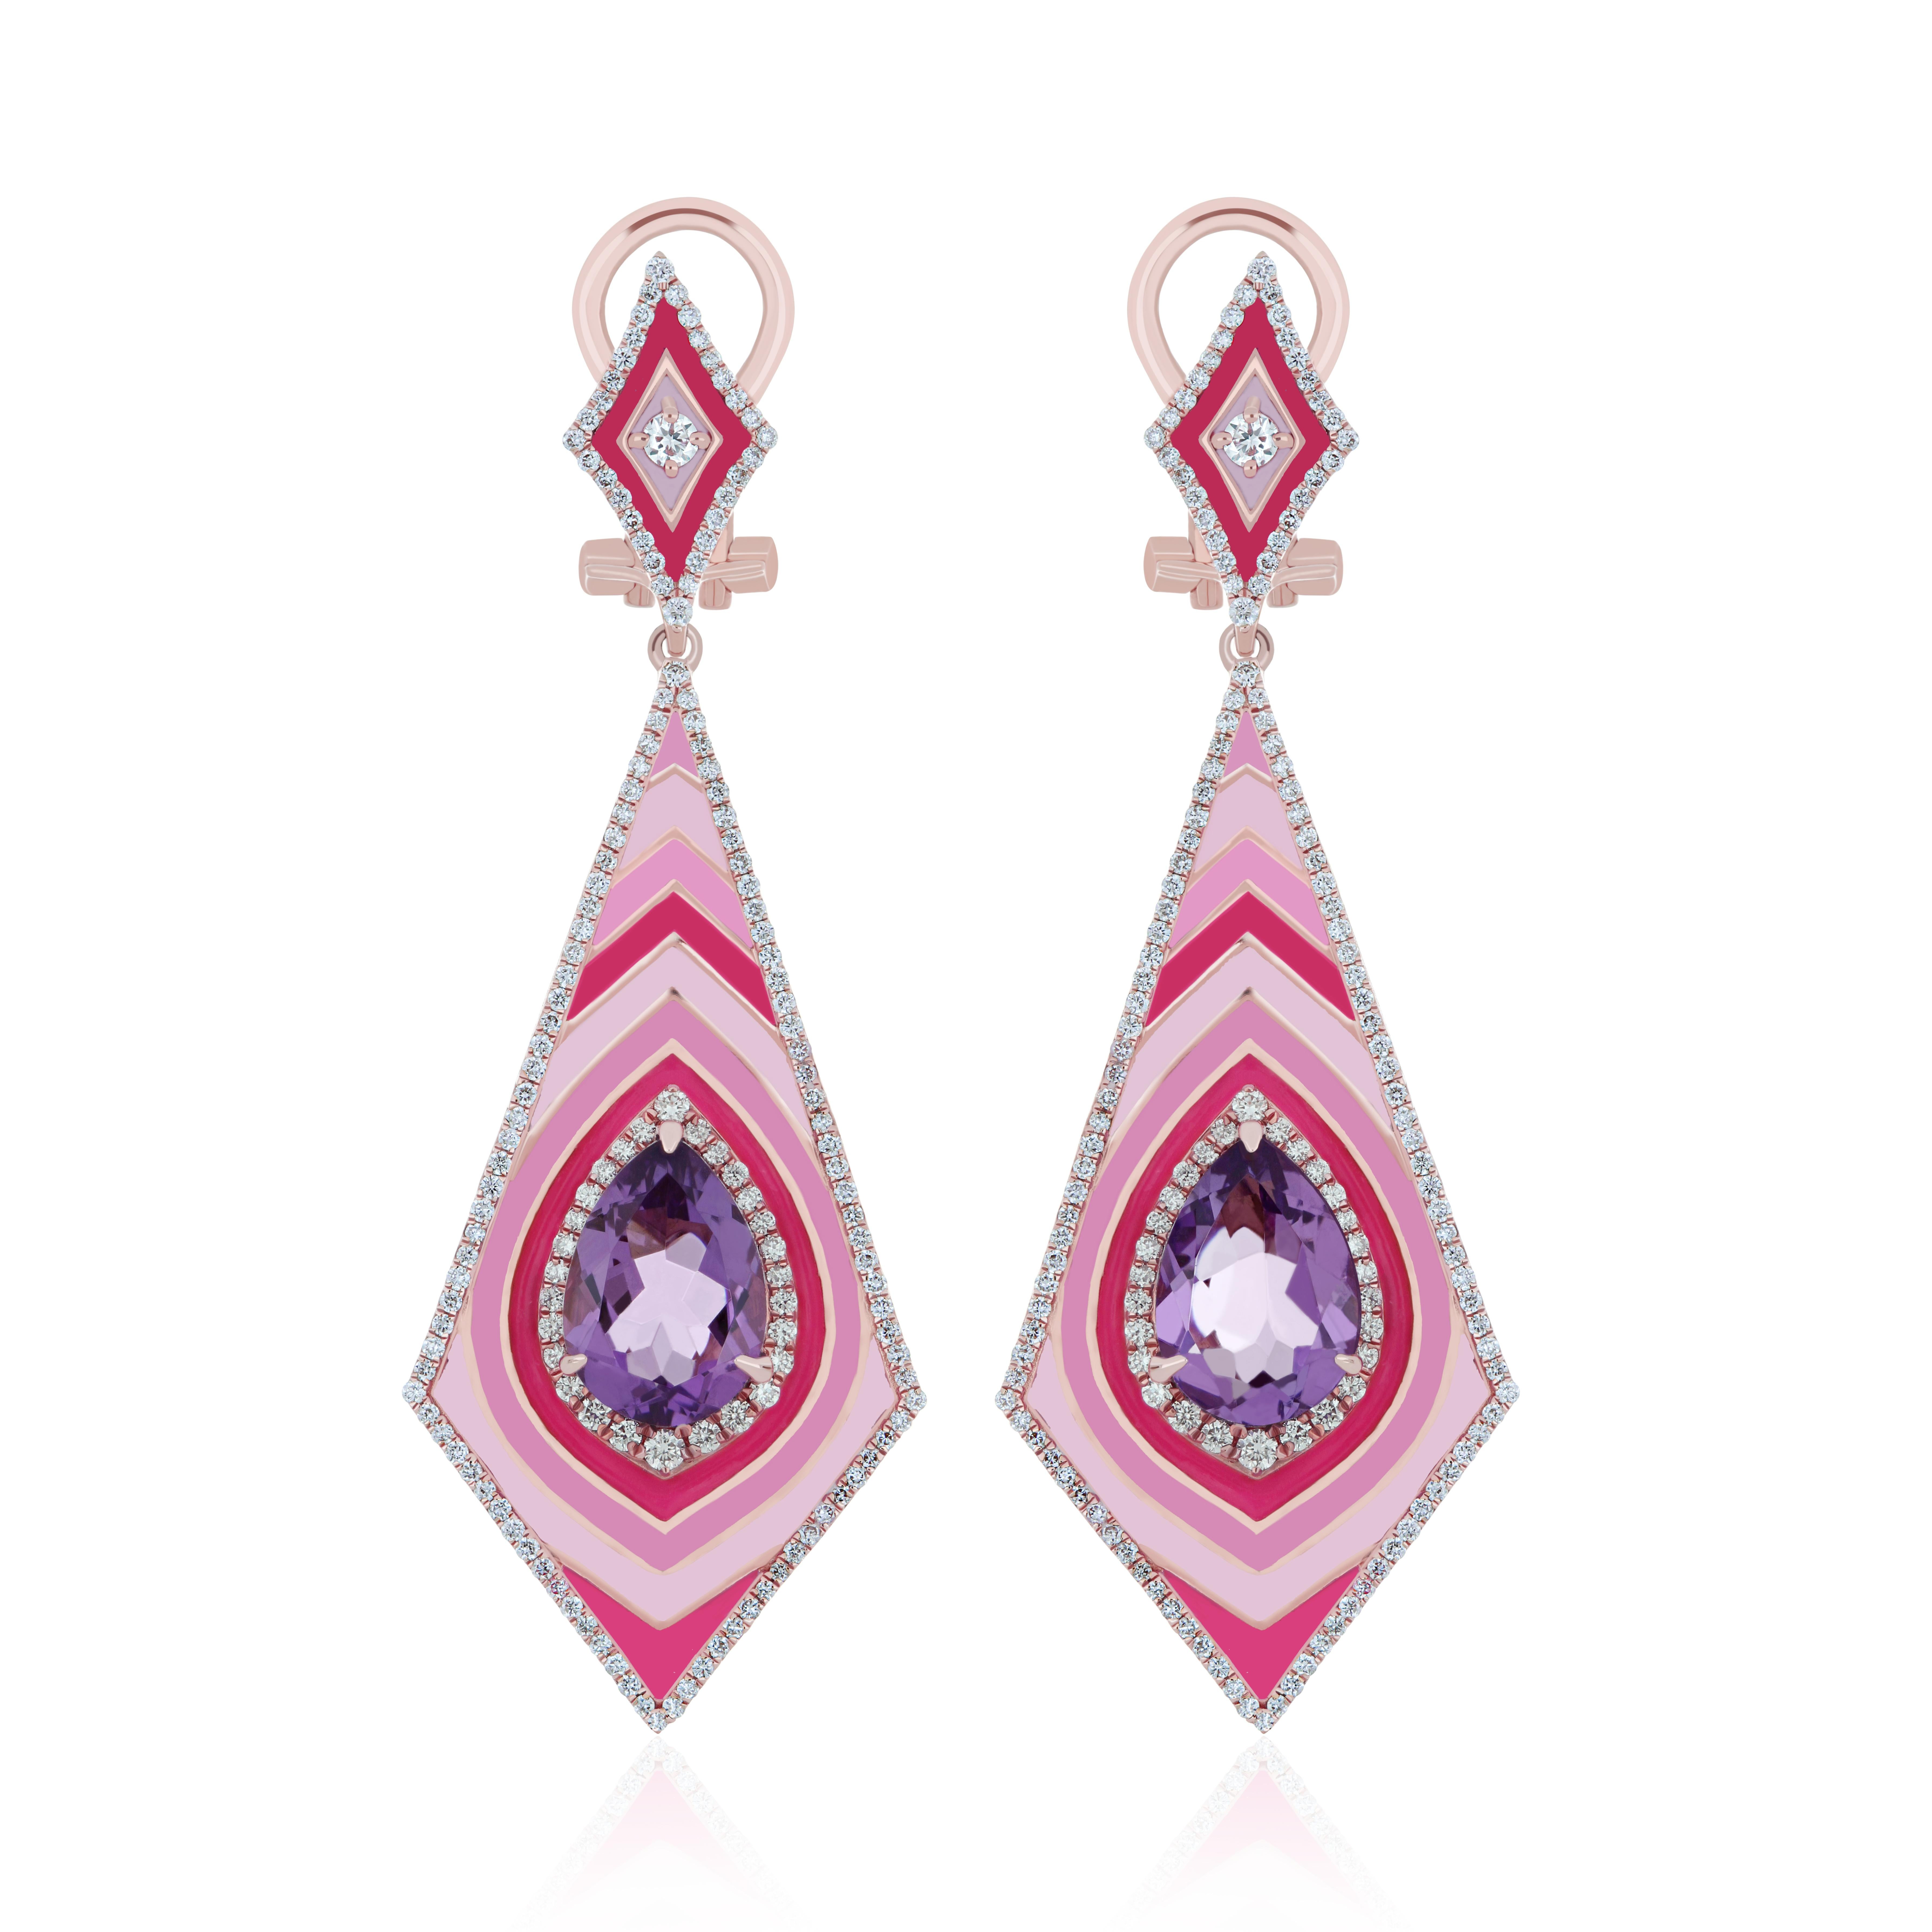 Elegant and exquisitely detailed 14karat Roes Gold Earring, with 3.6 Cts Pear Shape Pink Amethyst set in center and Surrounded by Micro pave Diamonds, weighing approx. 0.95 CT's. total carat weight and Enamel Earring to further enhance the beauty of